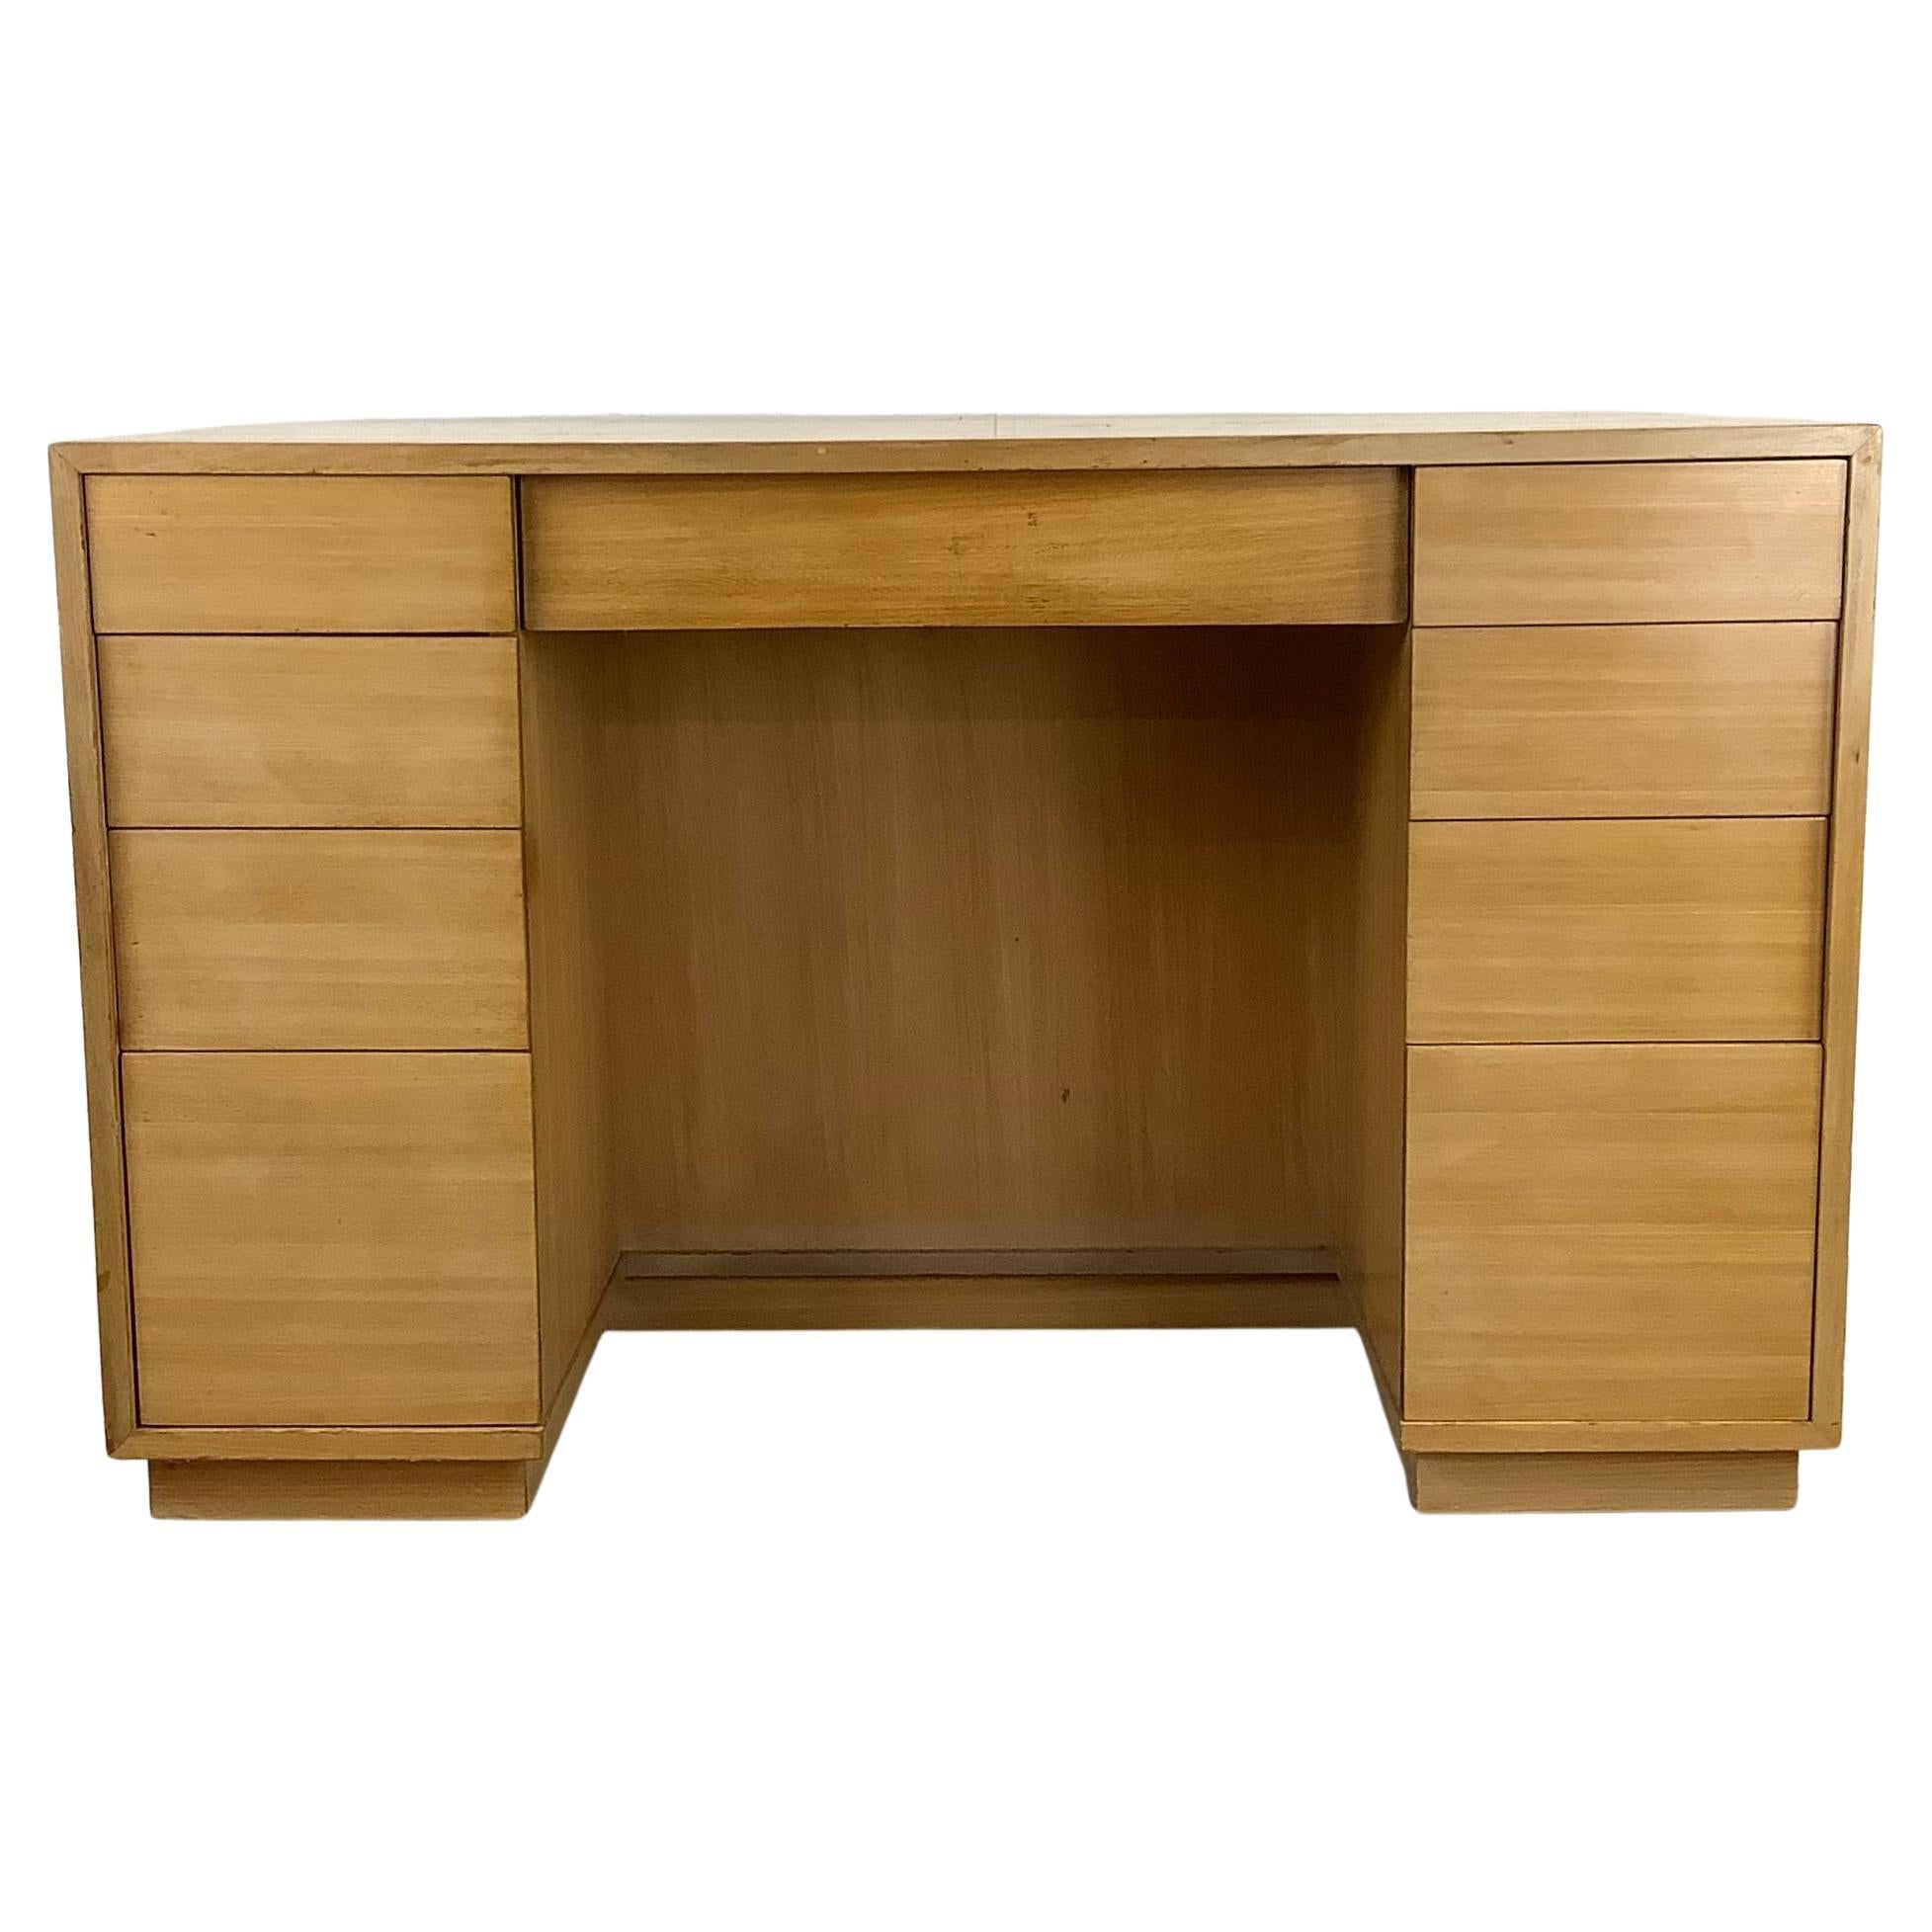 Midcentury Desk by Edward Wormley for Drexel